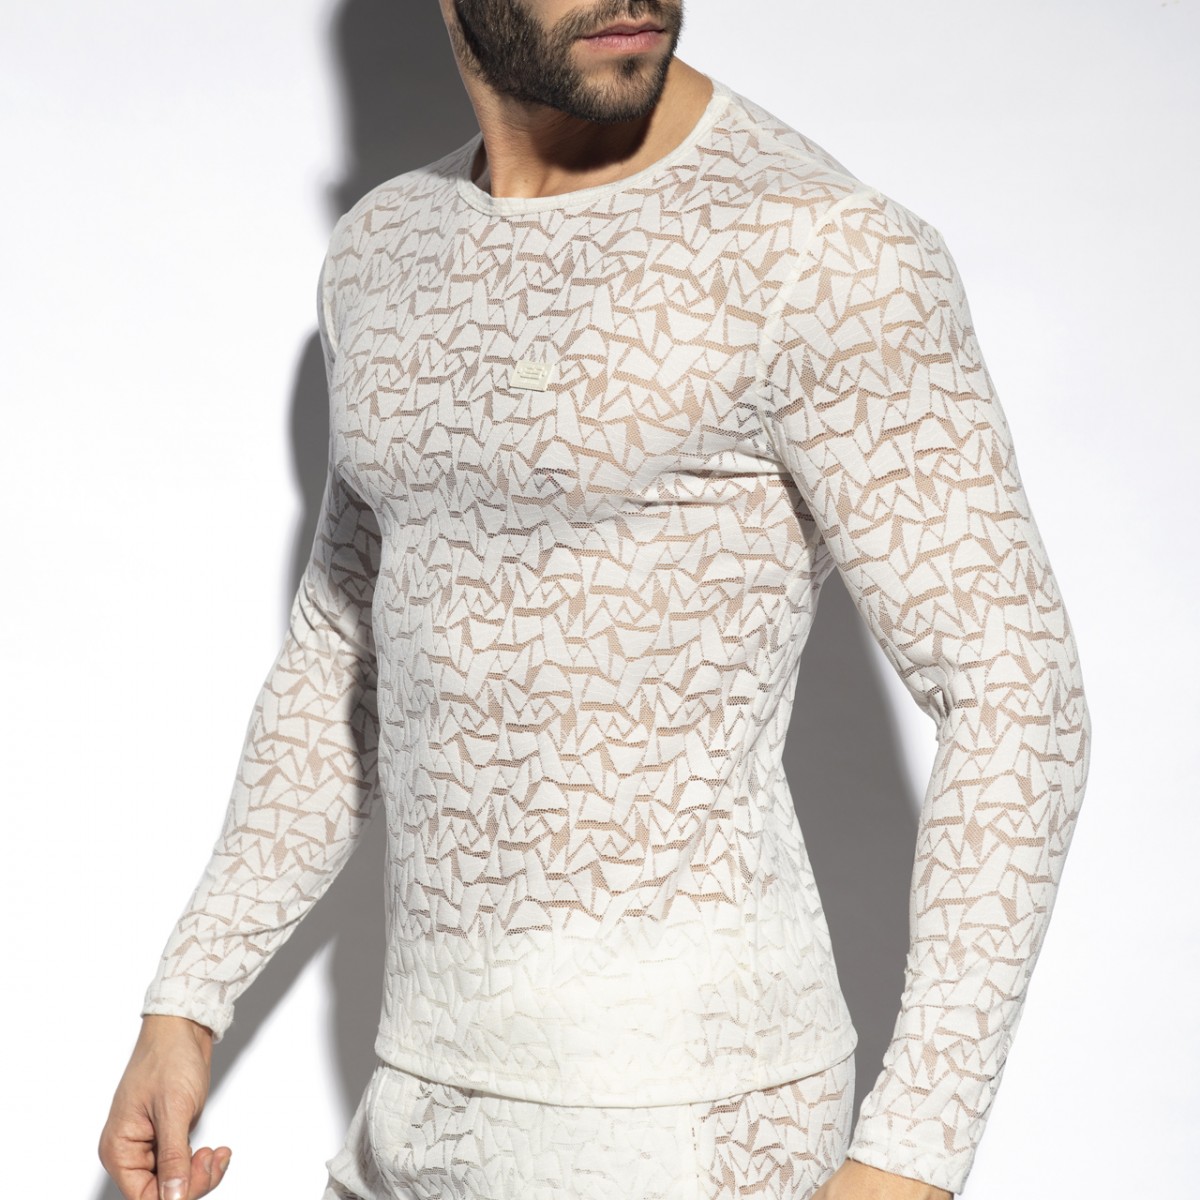 ES Collection Spider Long Sleeves T-Shirt ivory